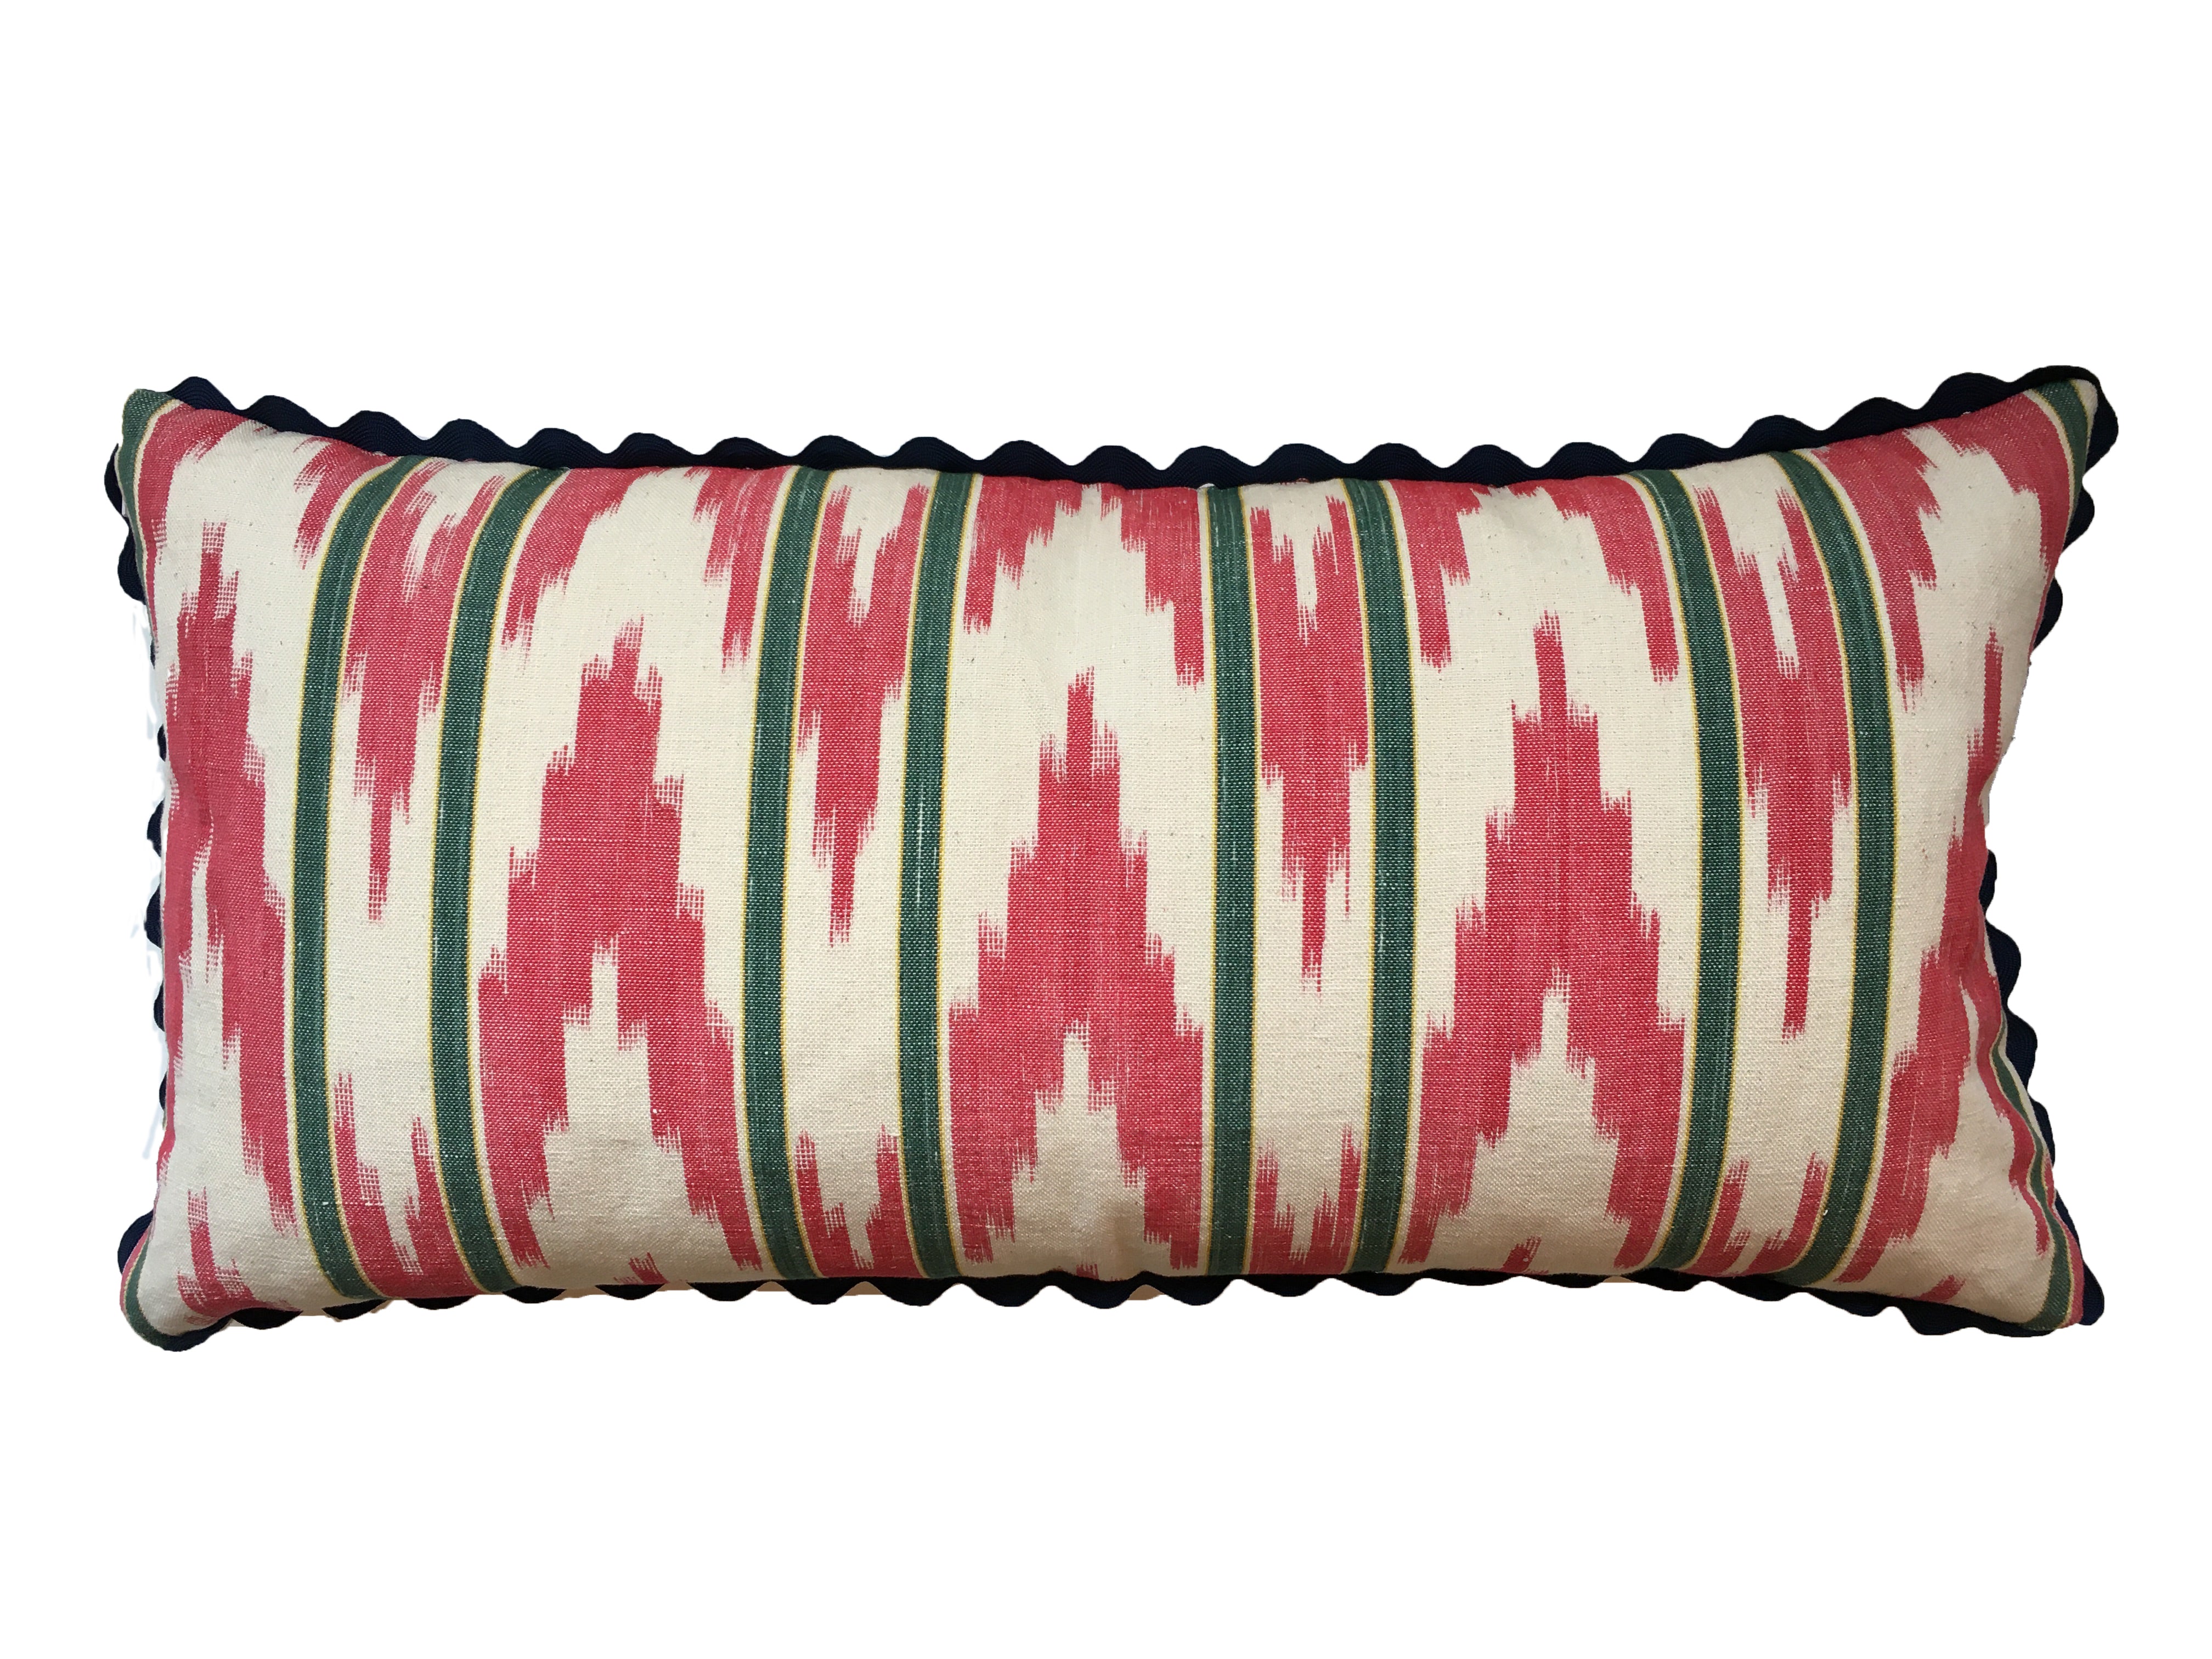 MALLORCAN FABRIC CUSHION - GREEN STRIPE WITH RED ZIGZAG FABRIC WITH NAVY SCALLOP EDGING